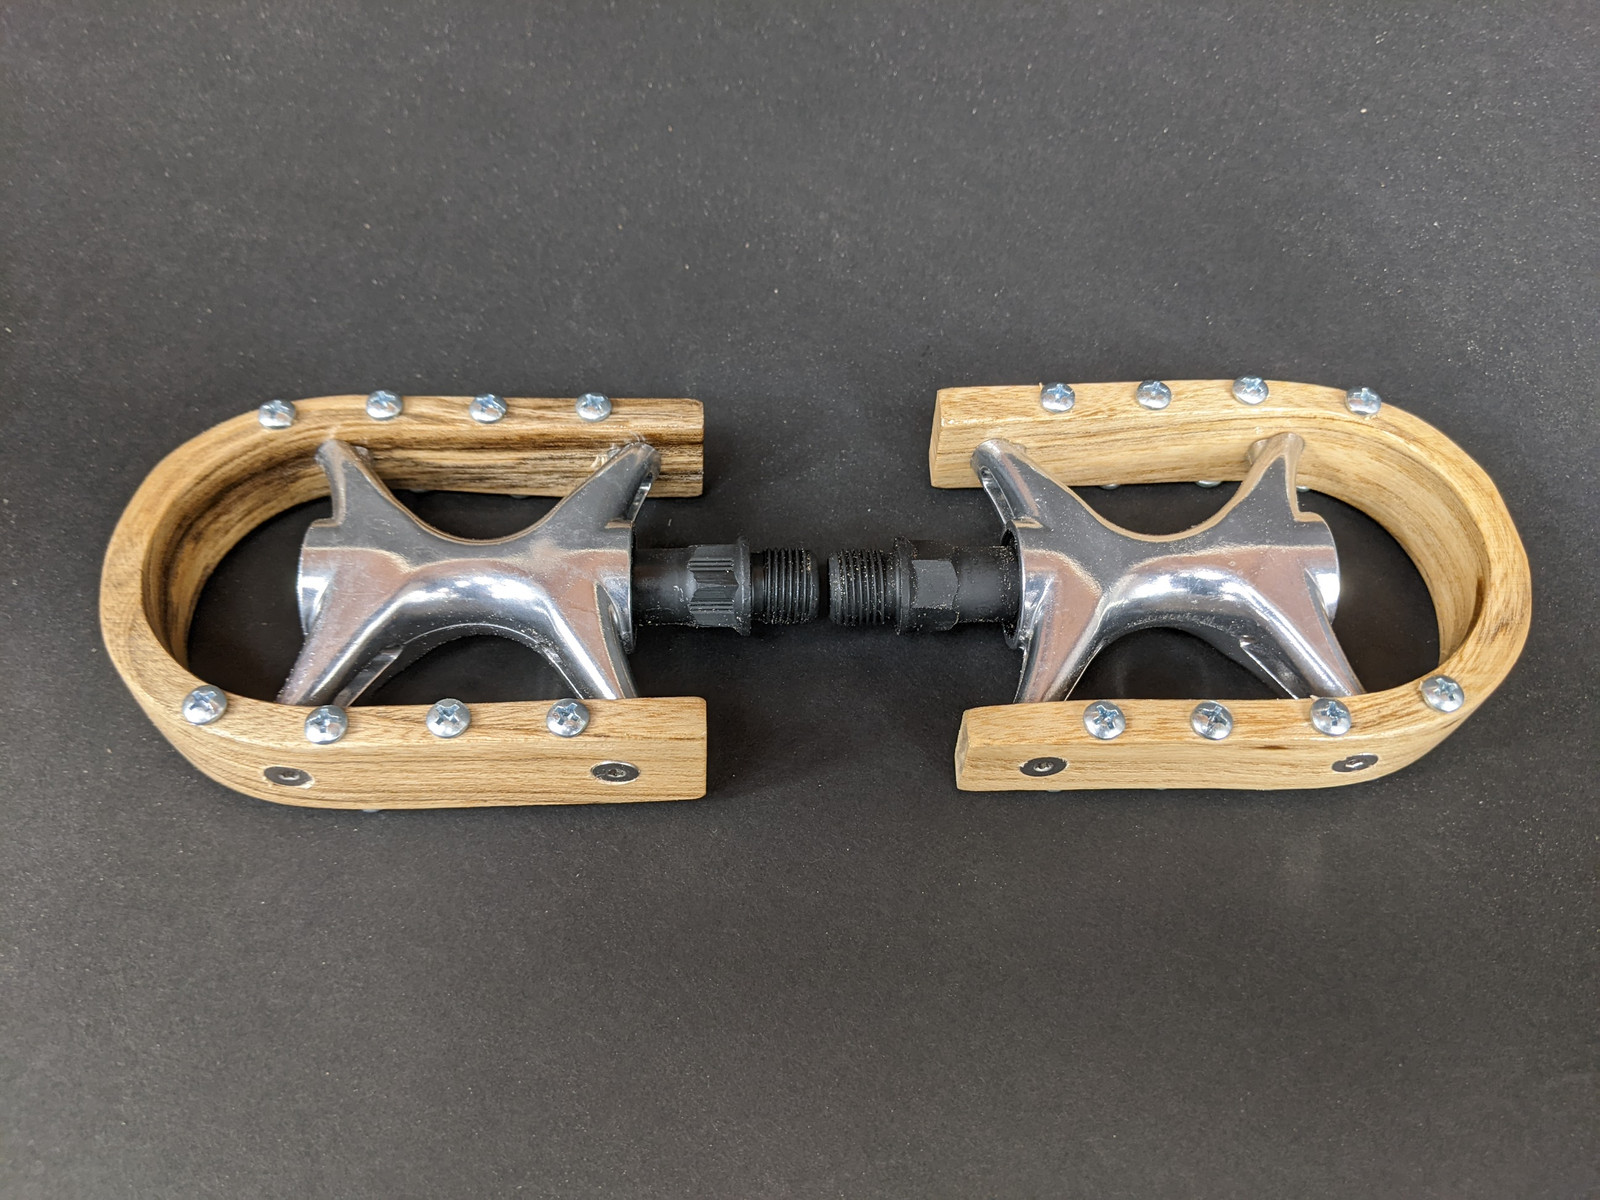 Renovo solid wood bent pedals for road or mountain bike riding. Bring some of the woods to your town. Specify road or mountain traction and platform or platform/clipless in your order notes.